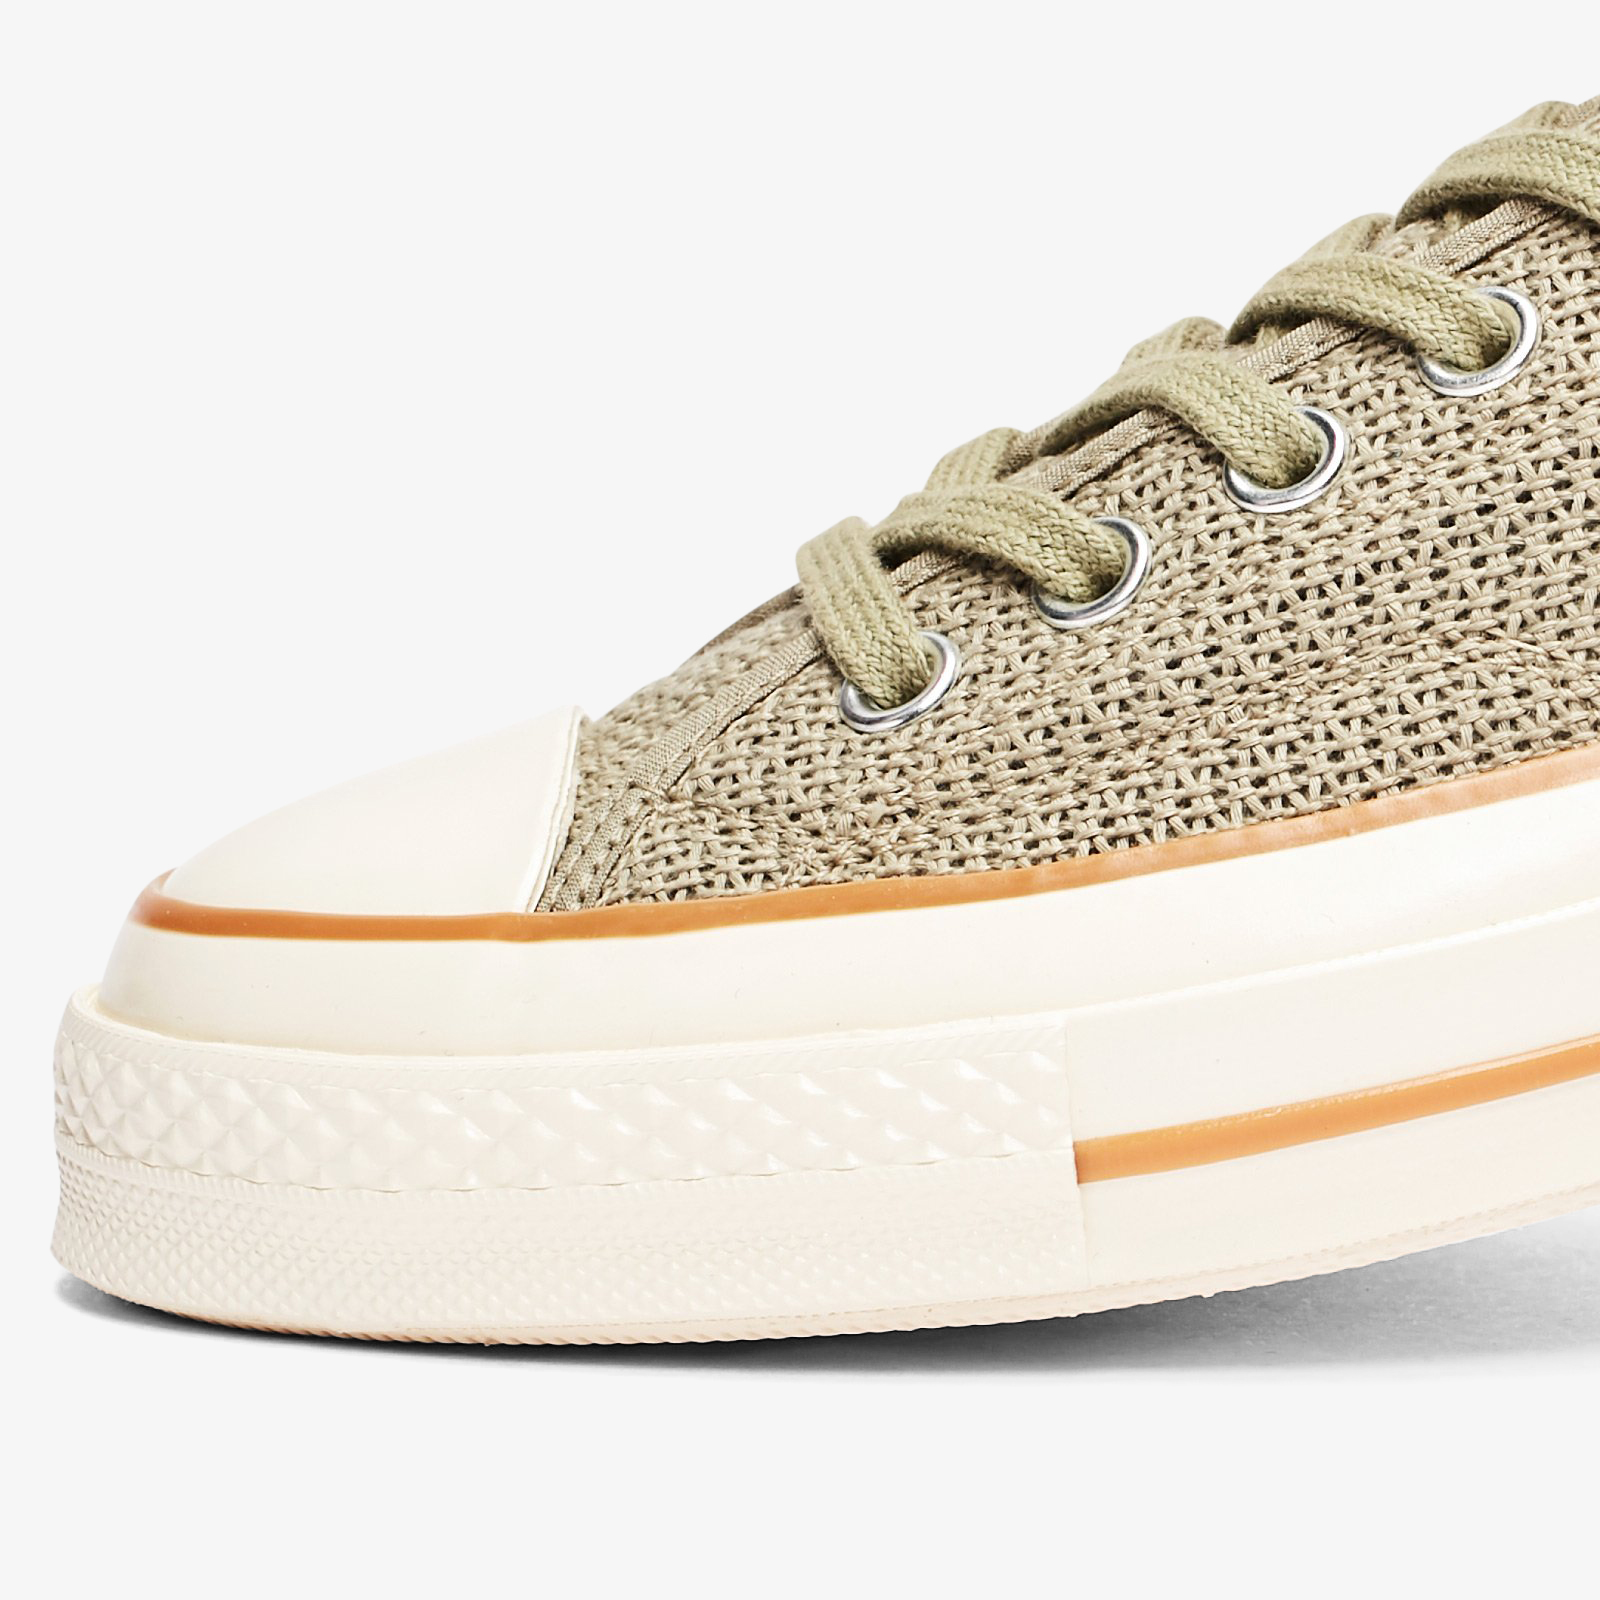 Norse Store | Shipping Worldwide - Sneakers - Converse - Chuck 70 OX Knit